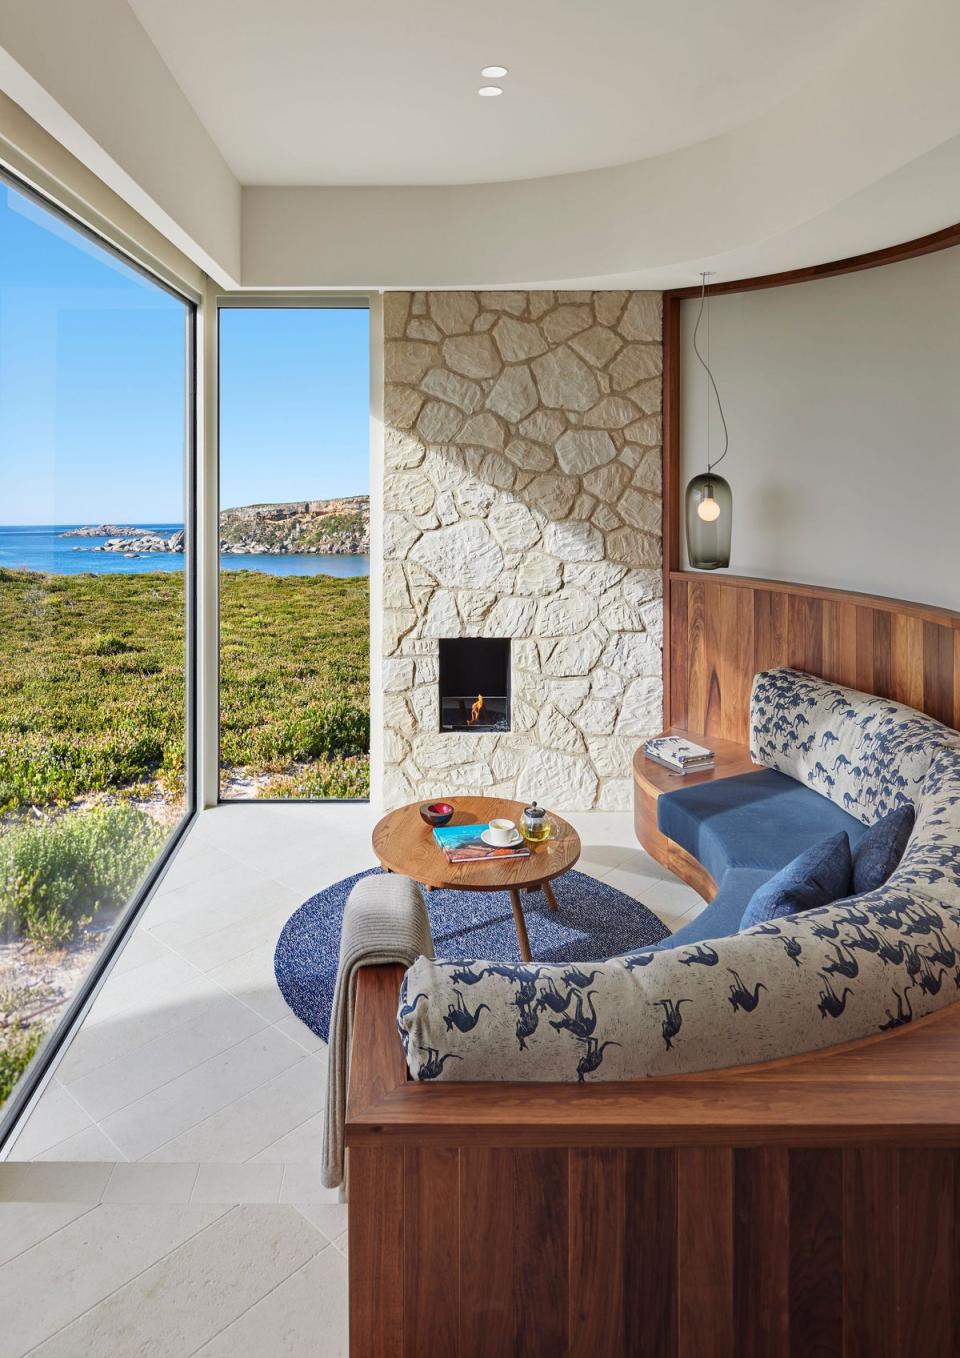 A Flinders Suite lounge overlooking the sea (Baillie Lodges)